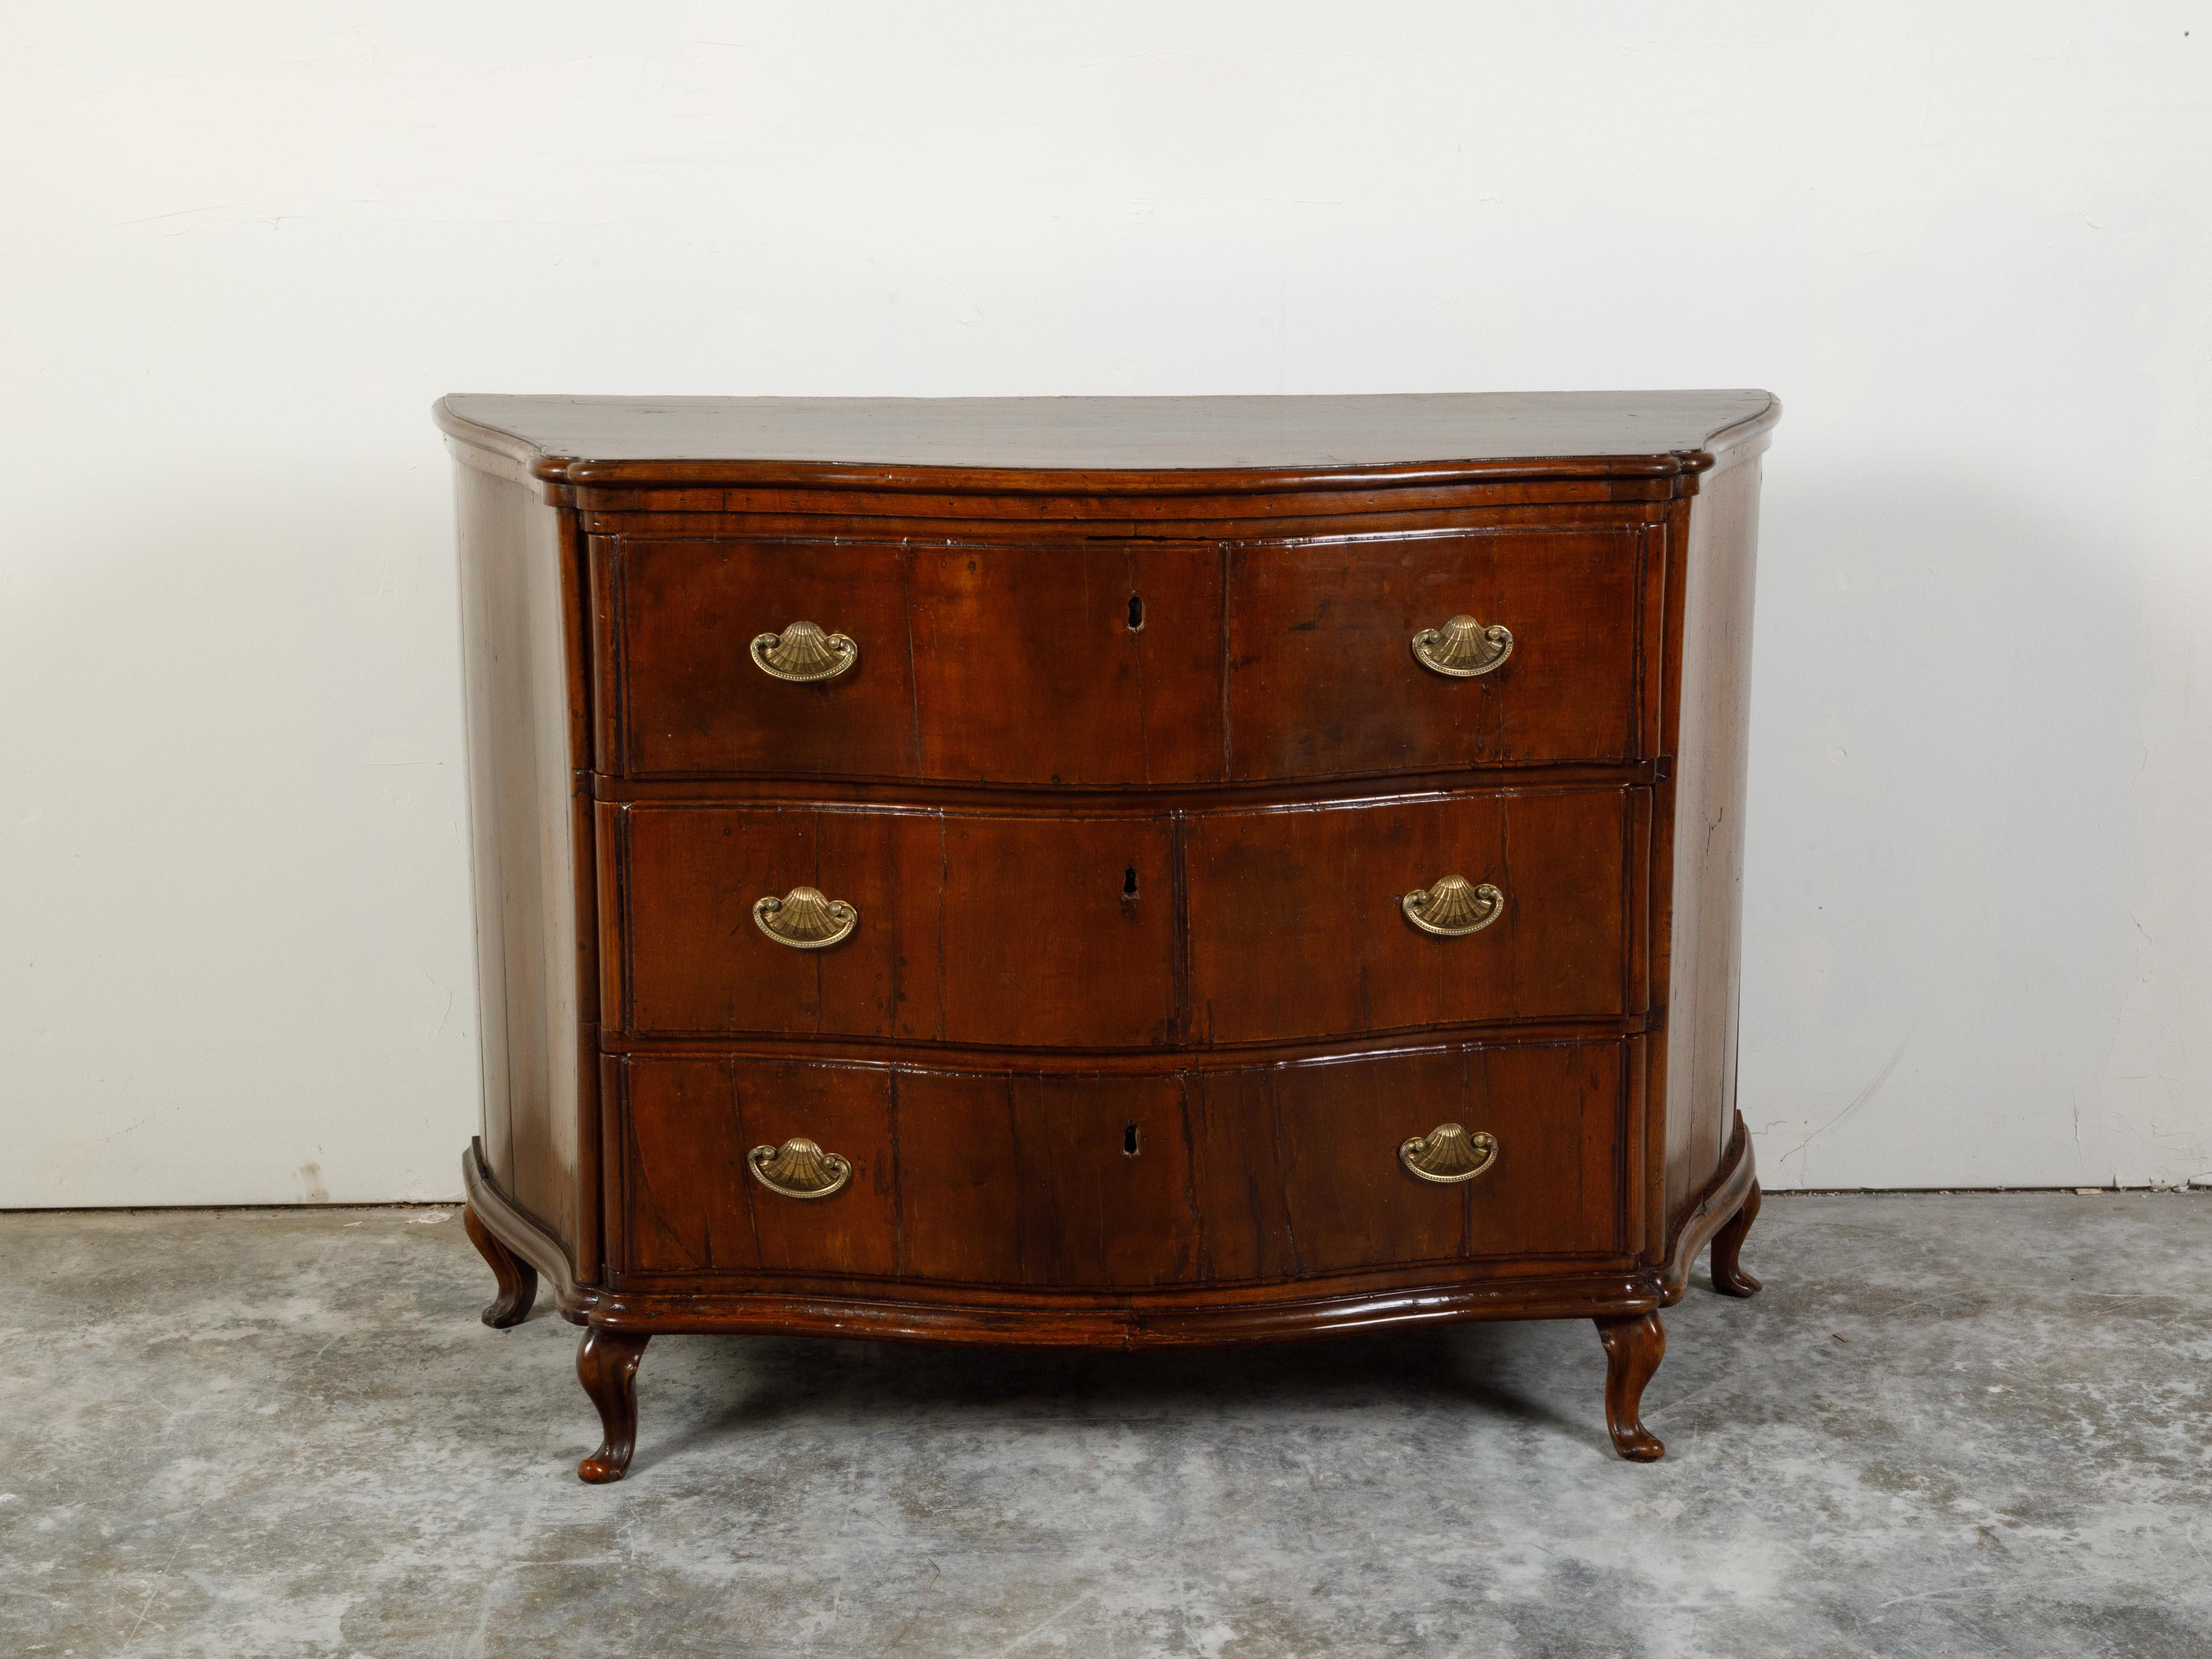 An Italian walnut commode from the early 19th century, with three drawers, serpentine front and bronze hardware. Created in Italy during the early years of the 19th century, this walnut commode features a rectangular top with serpentine front,